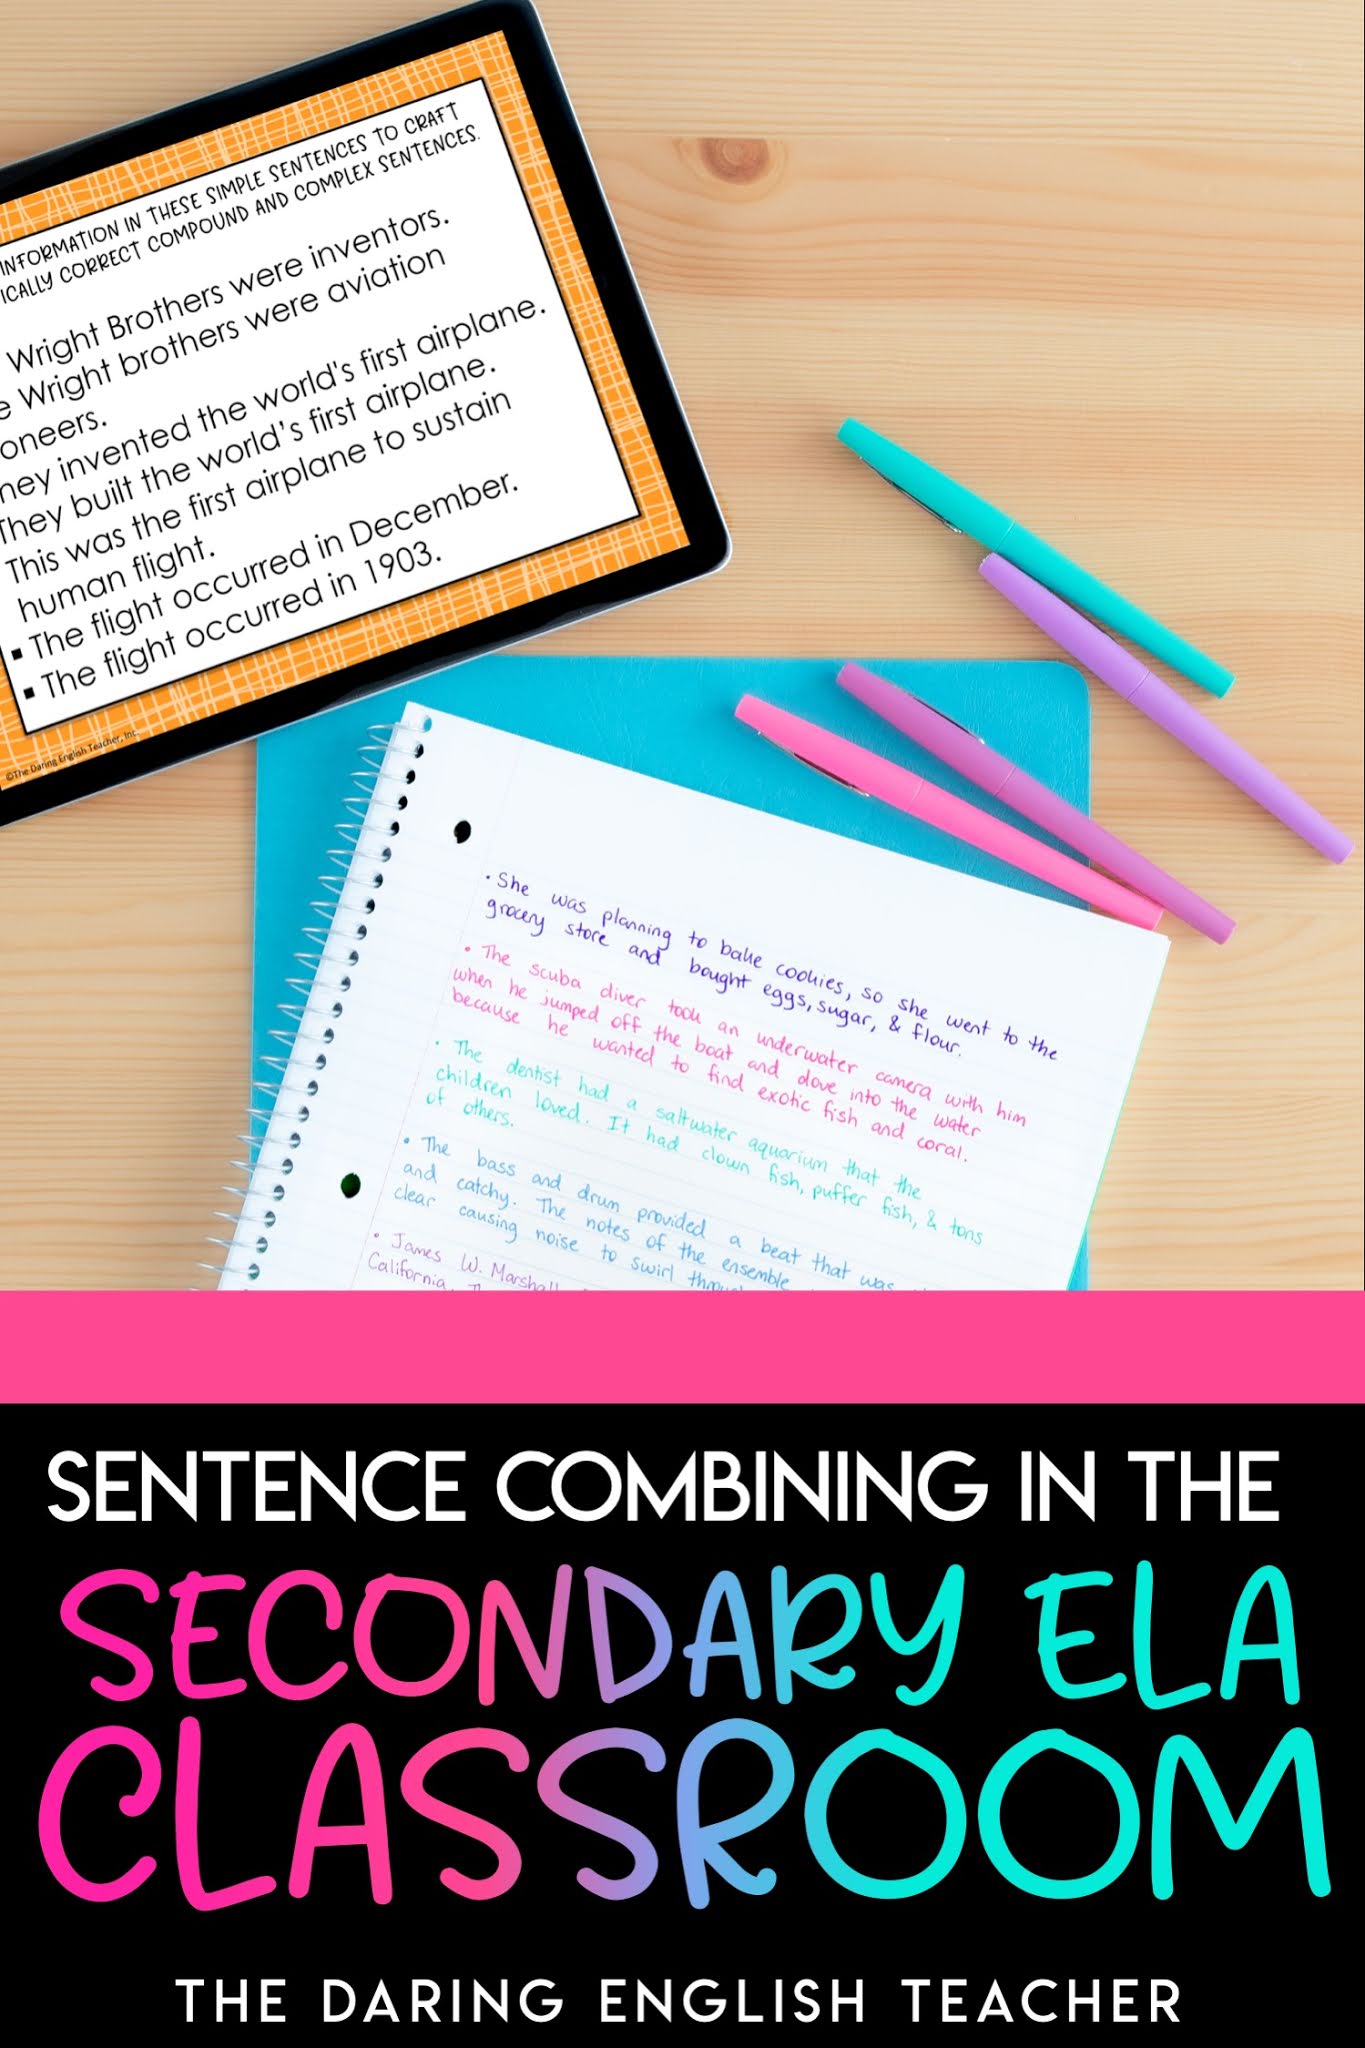 Three Academic Routines to Implement in your Secondary ELA Class this School Year